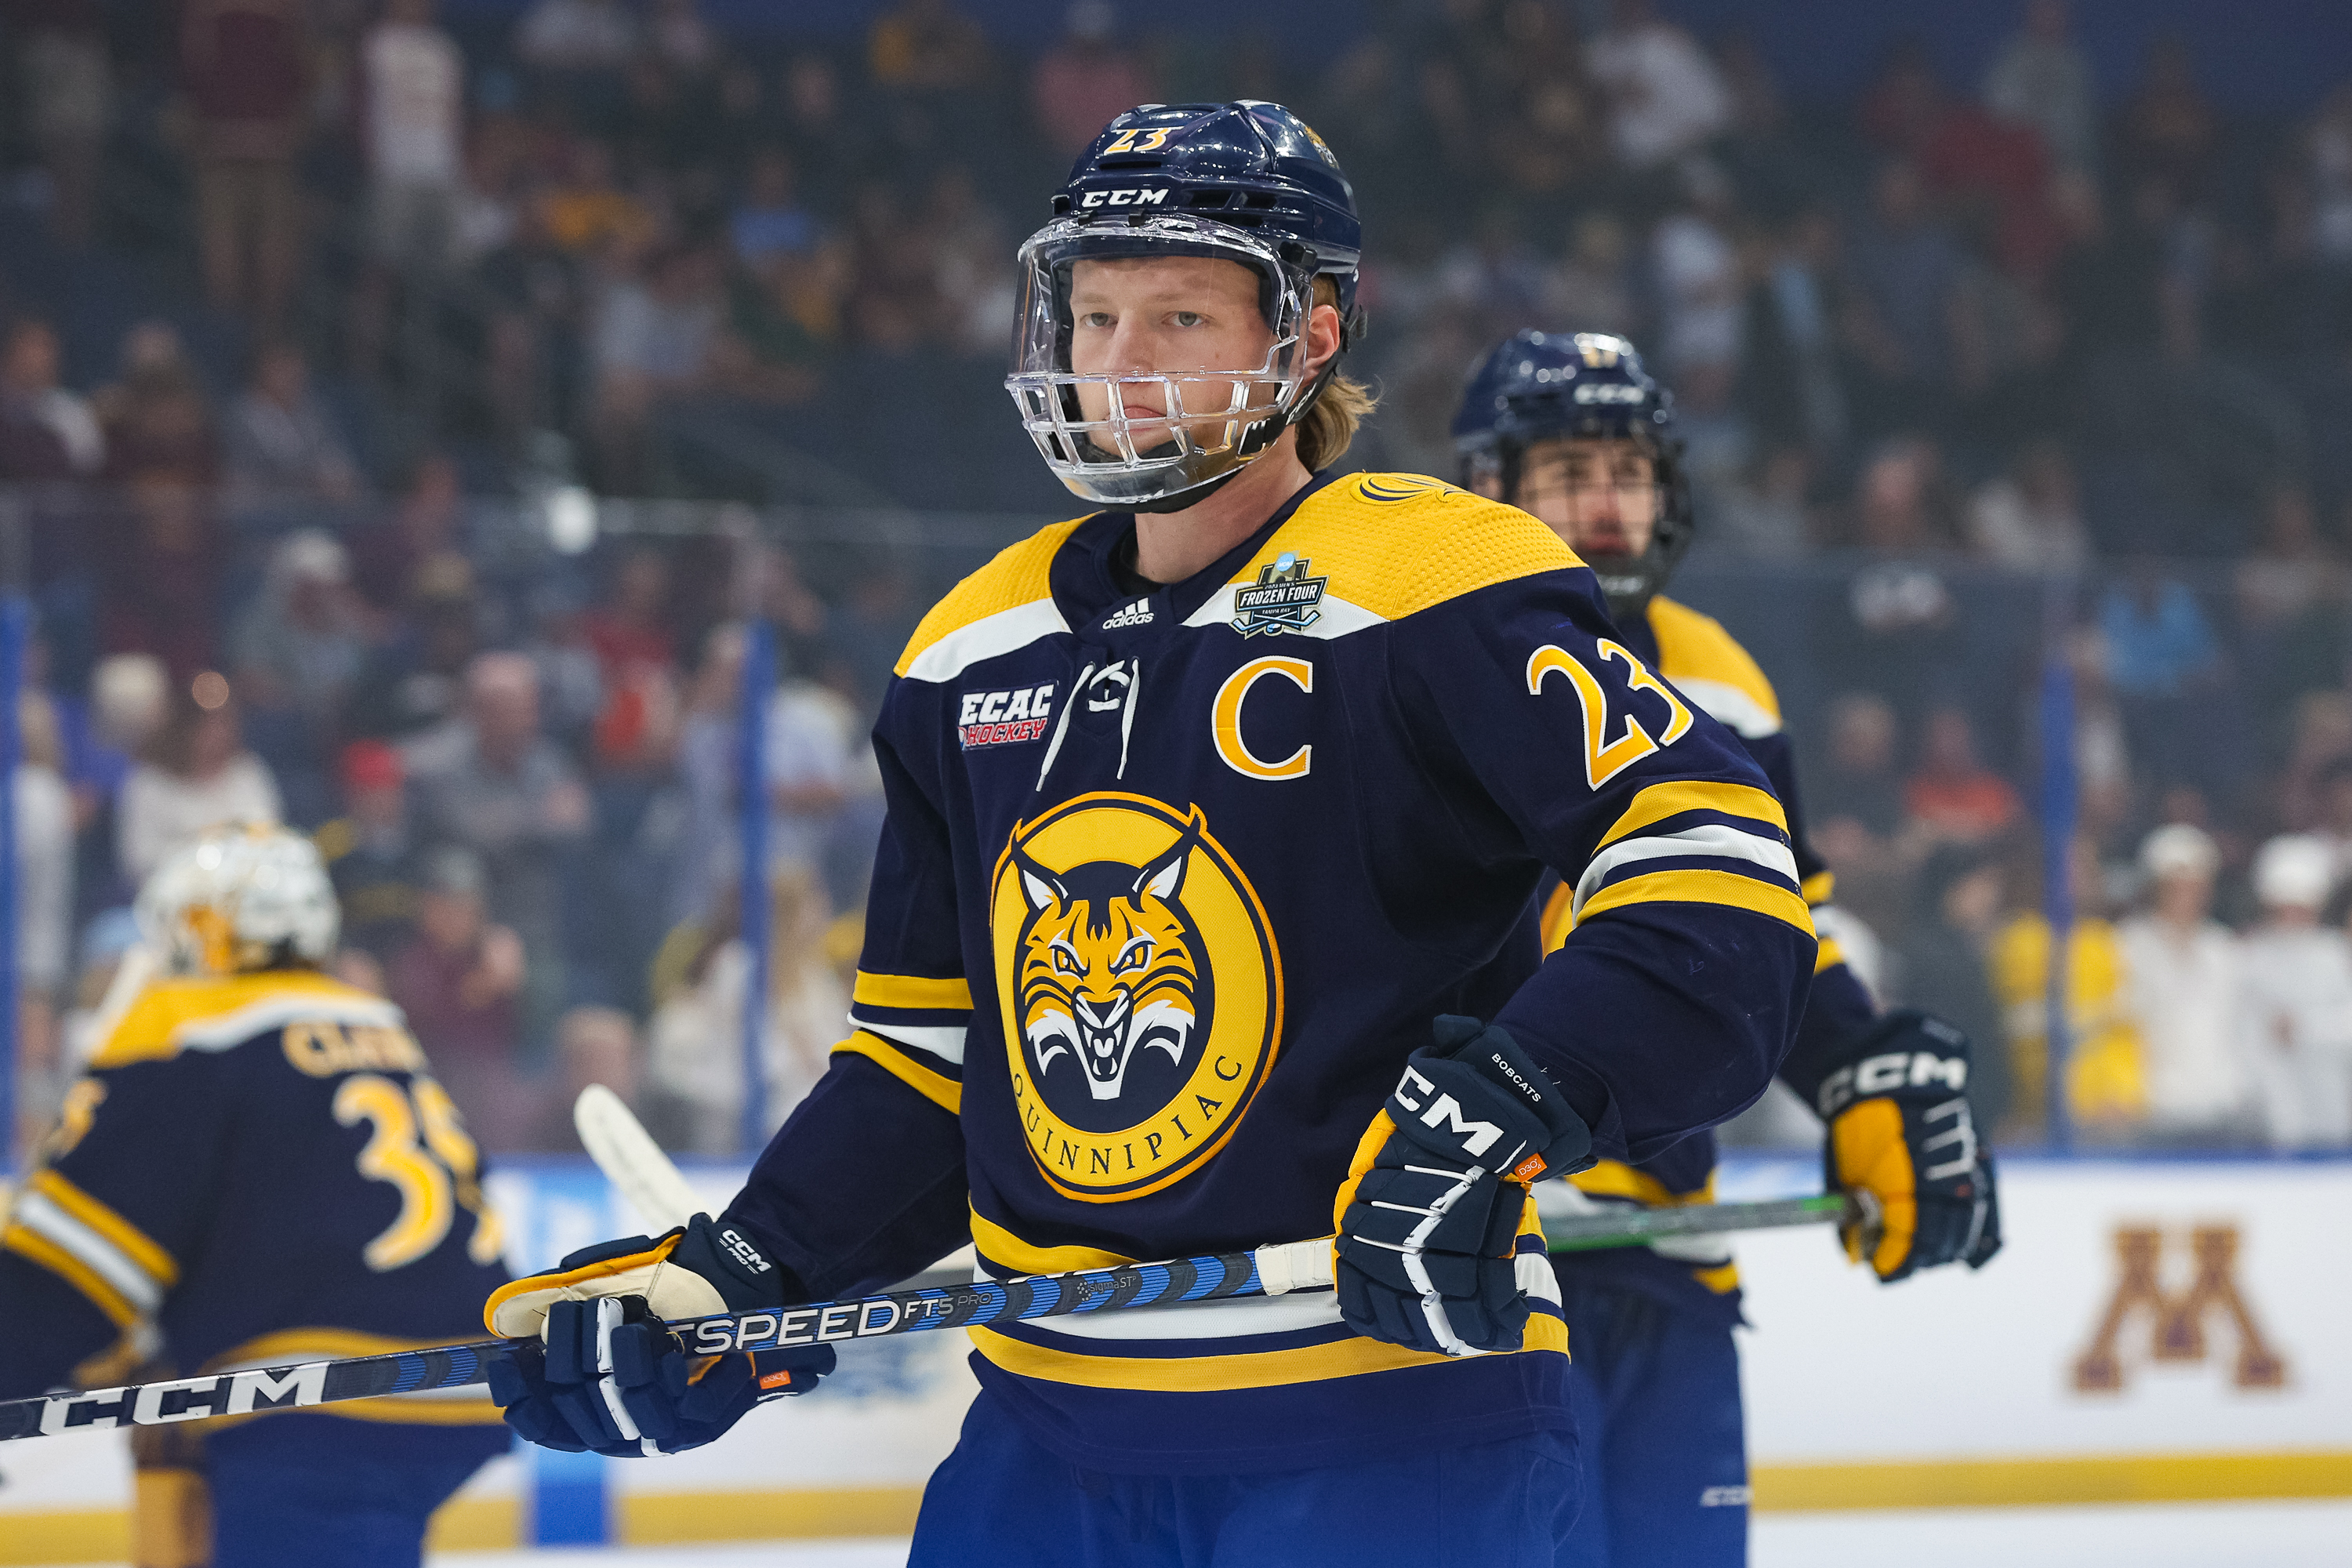 Quinnipiac Men's Ice Hockey on X: One more record to end this remarkable  season for Yaniv Perets! Perets posted a 1.17 goals against average this  season which broke the record of NHL